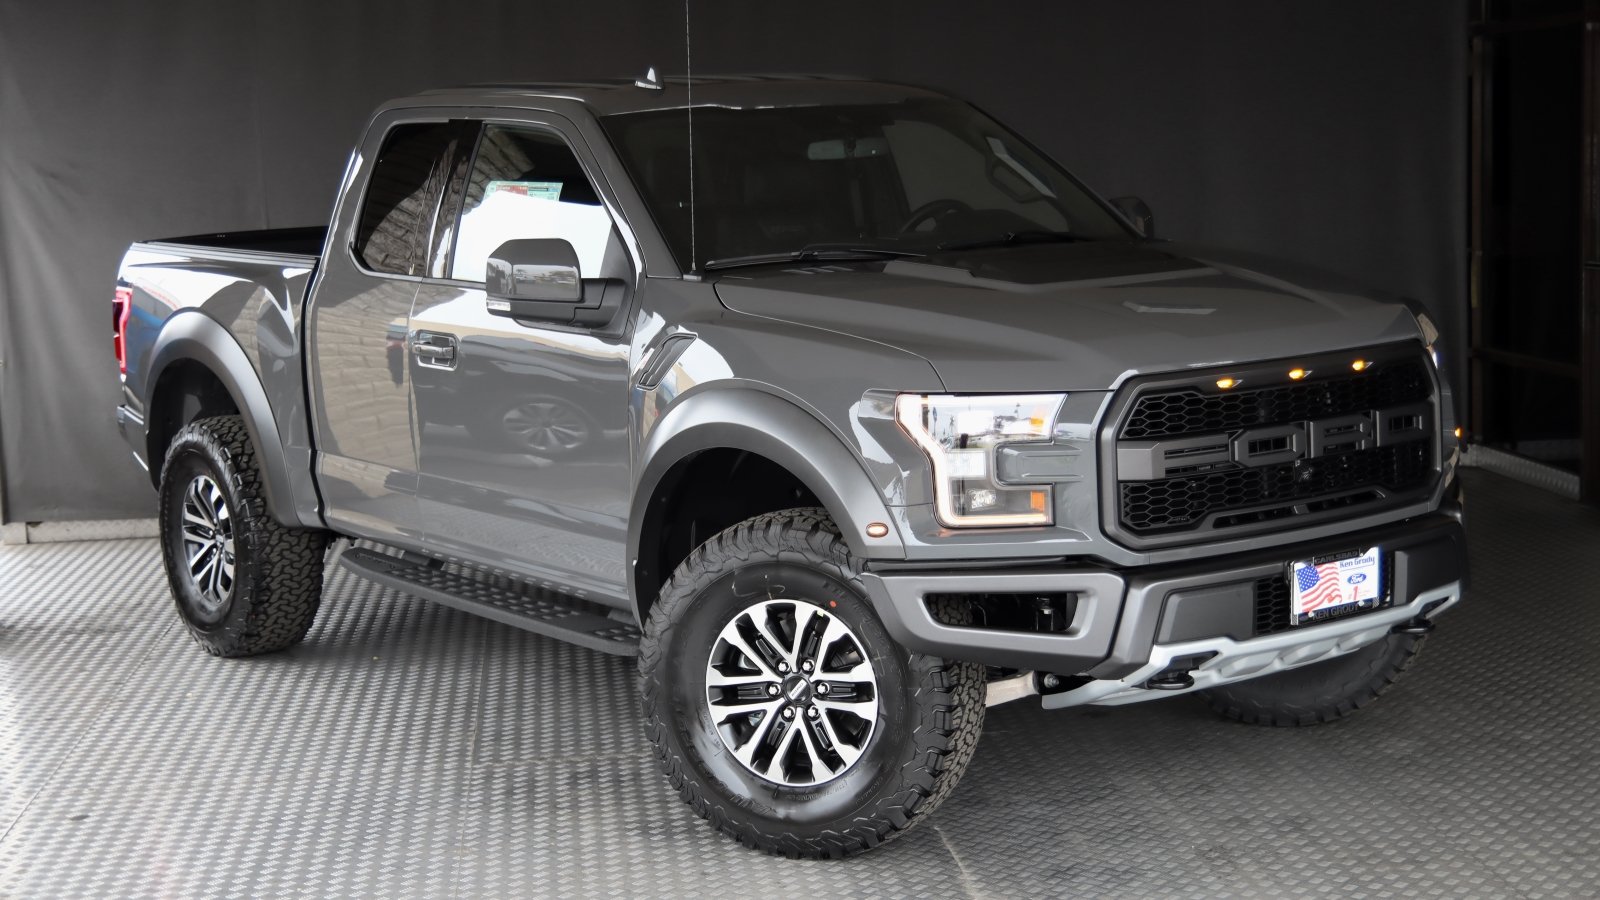 New 2020 Ford F-150 Raptor Extended Cab Pickup in Buena Park #01765 ...